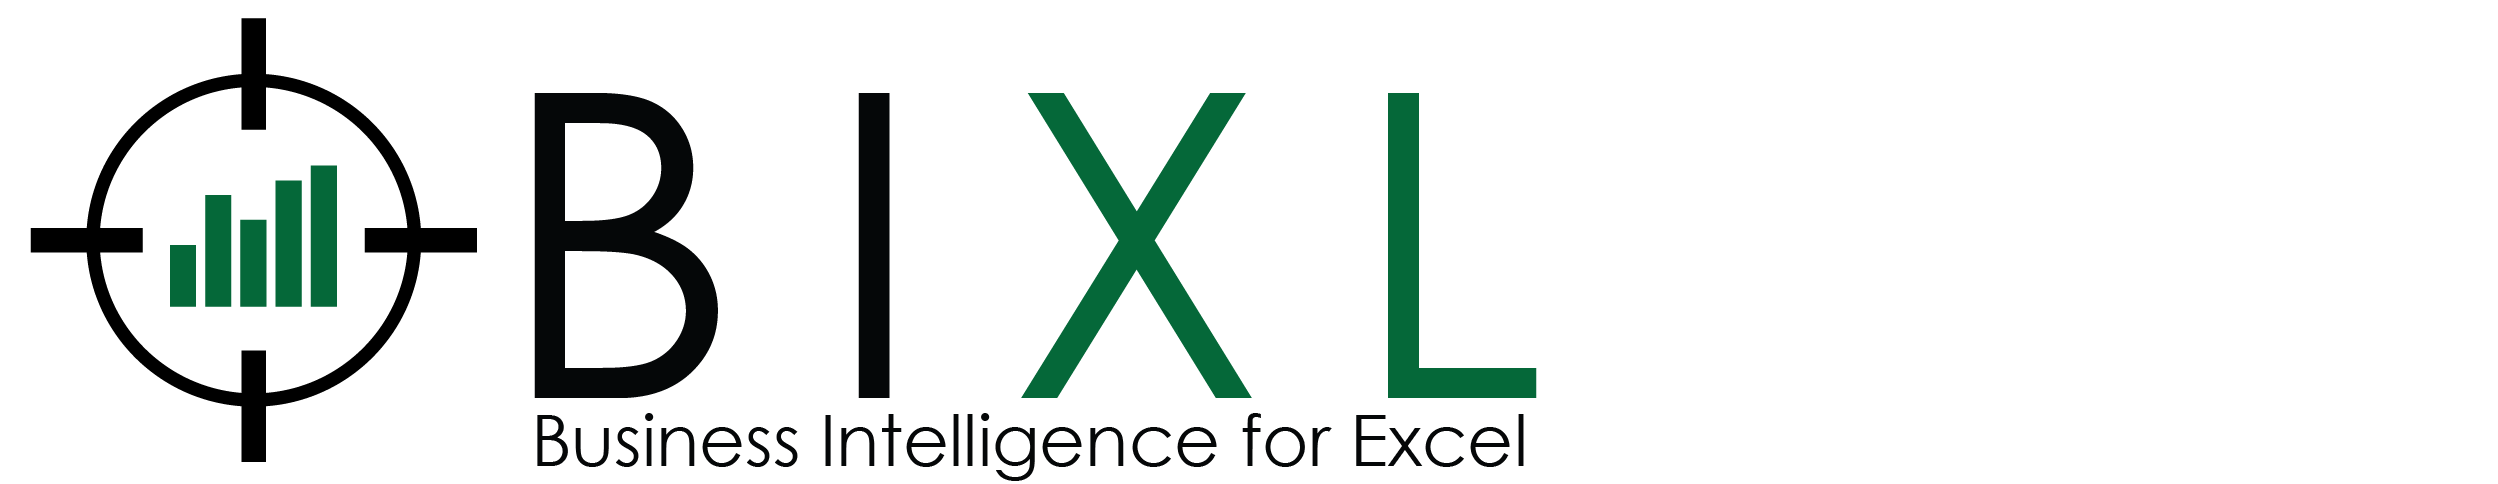 Business Intelligence for Excel